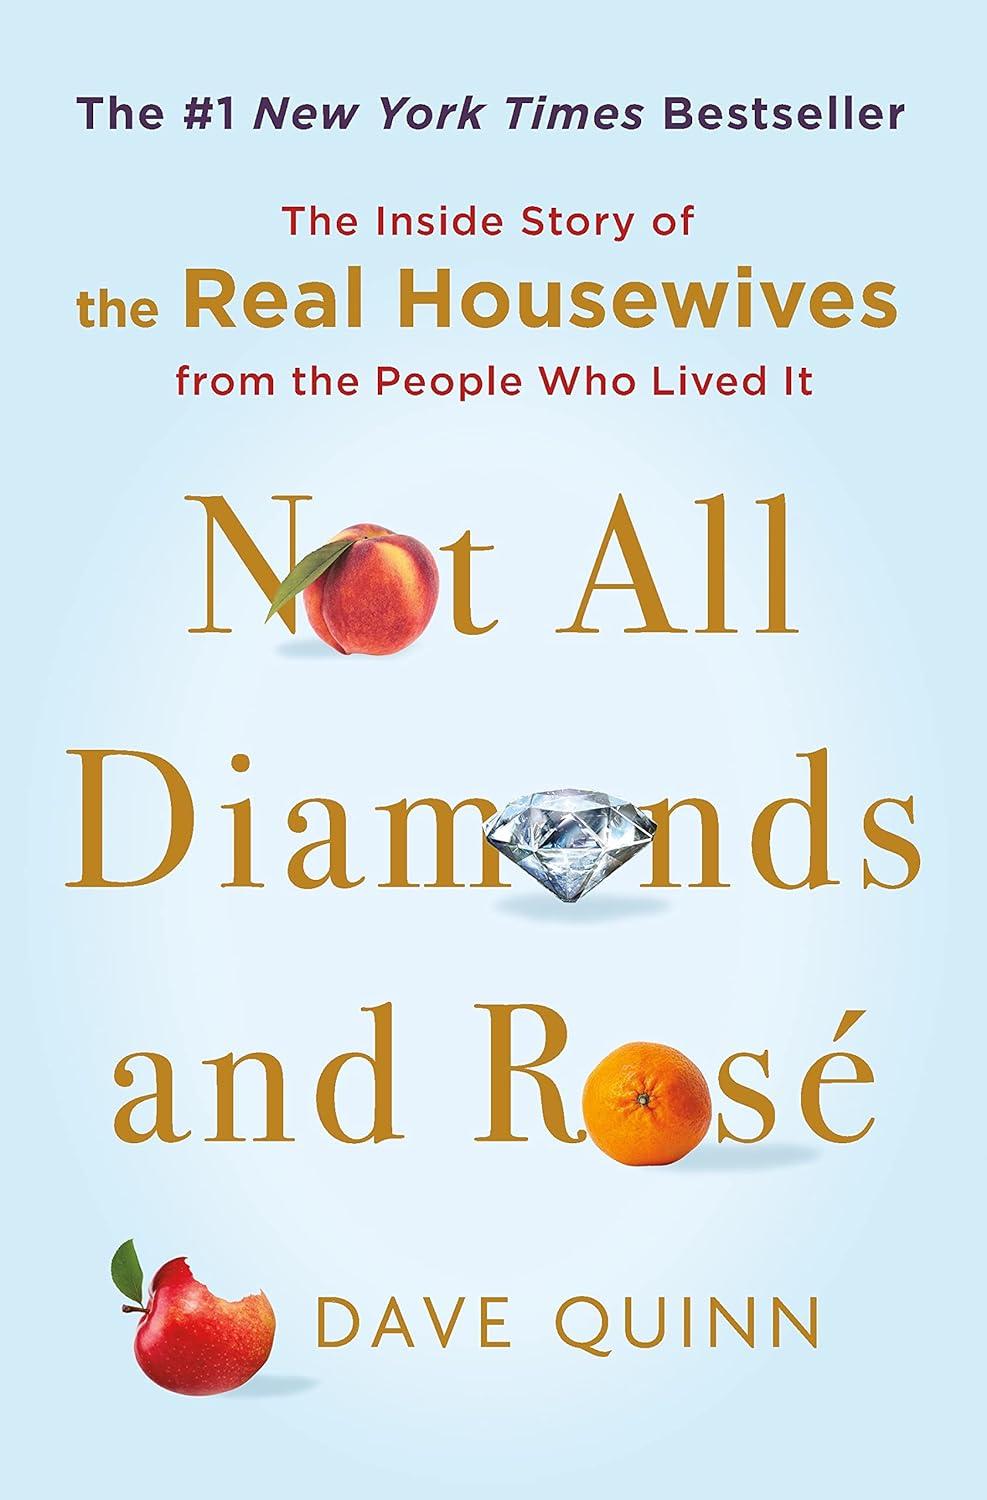 A blue book cover with text and peaches, diamonds, oranges, and apples.